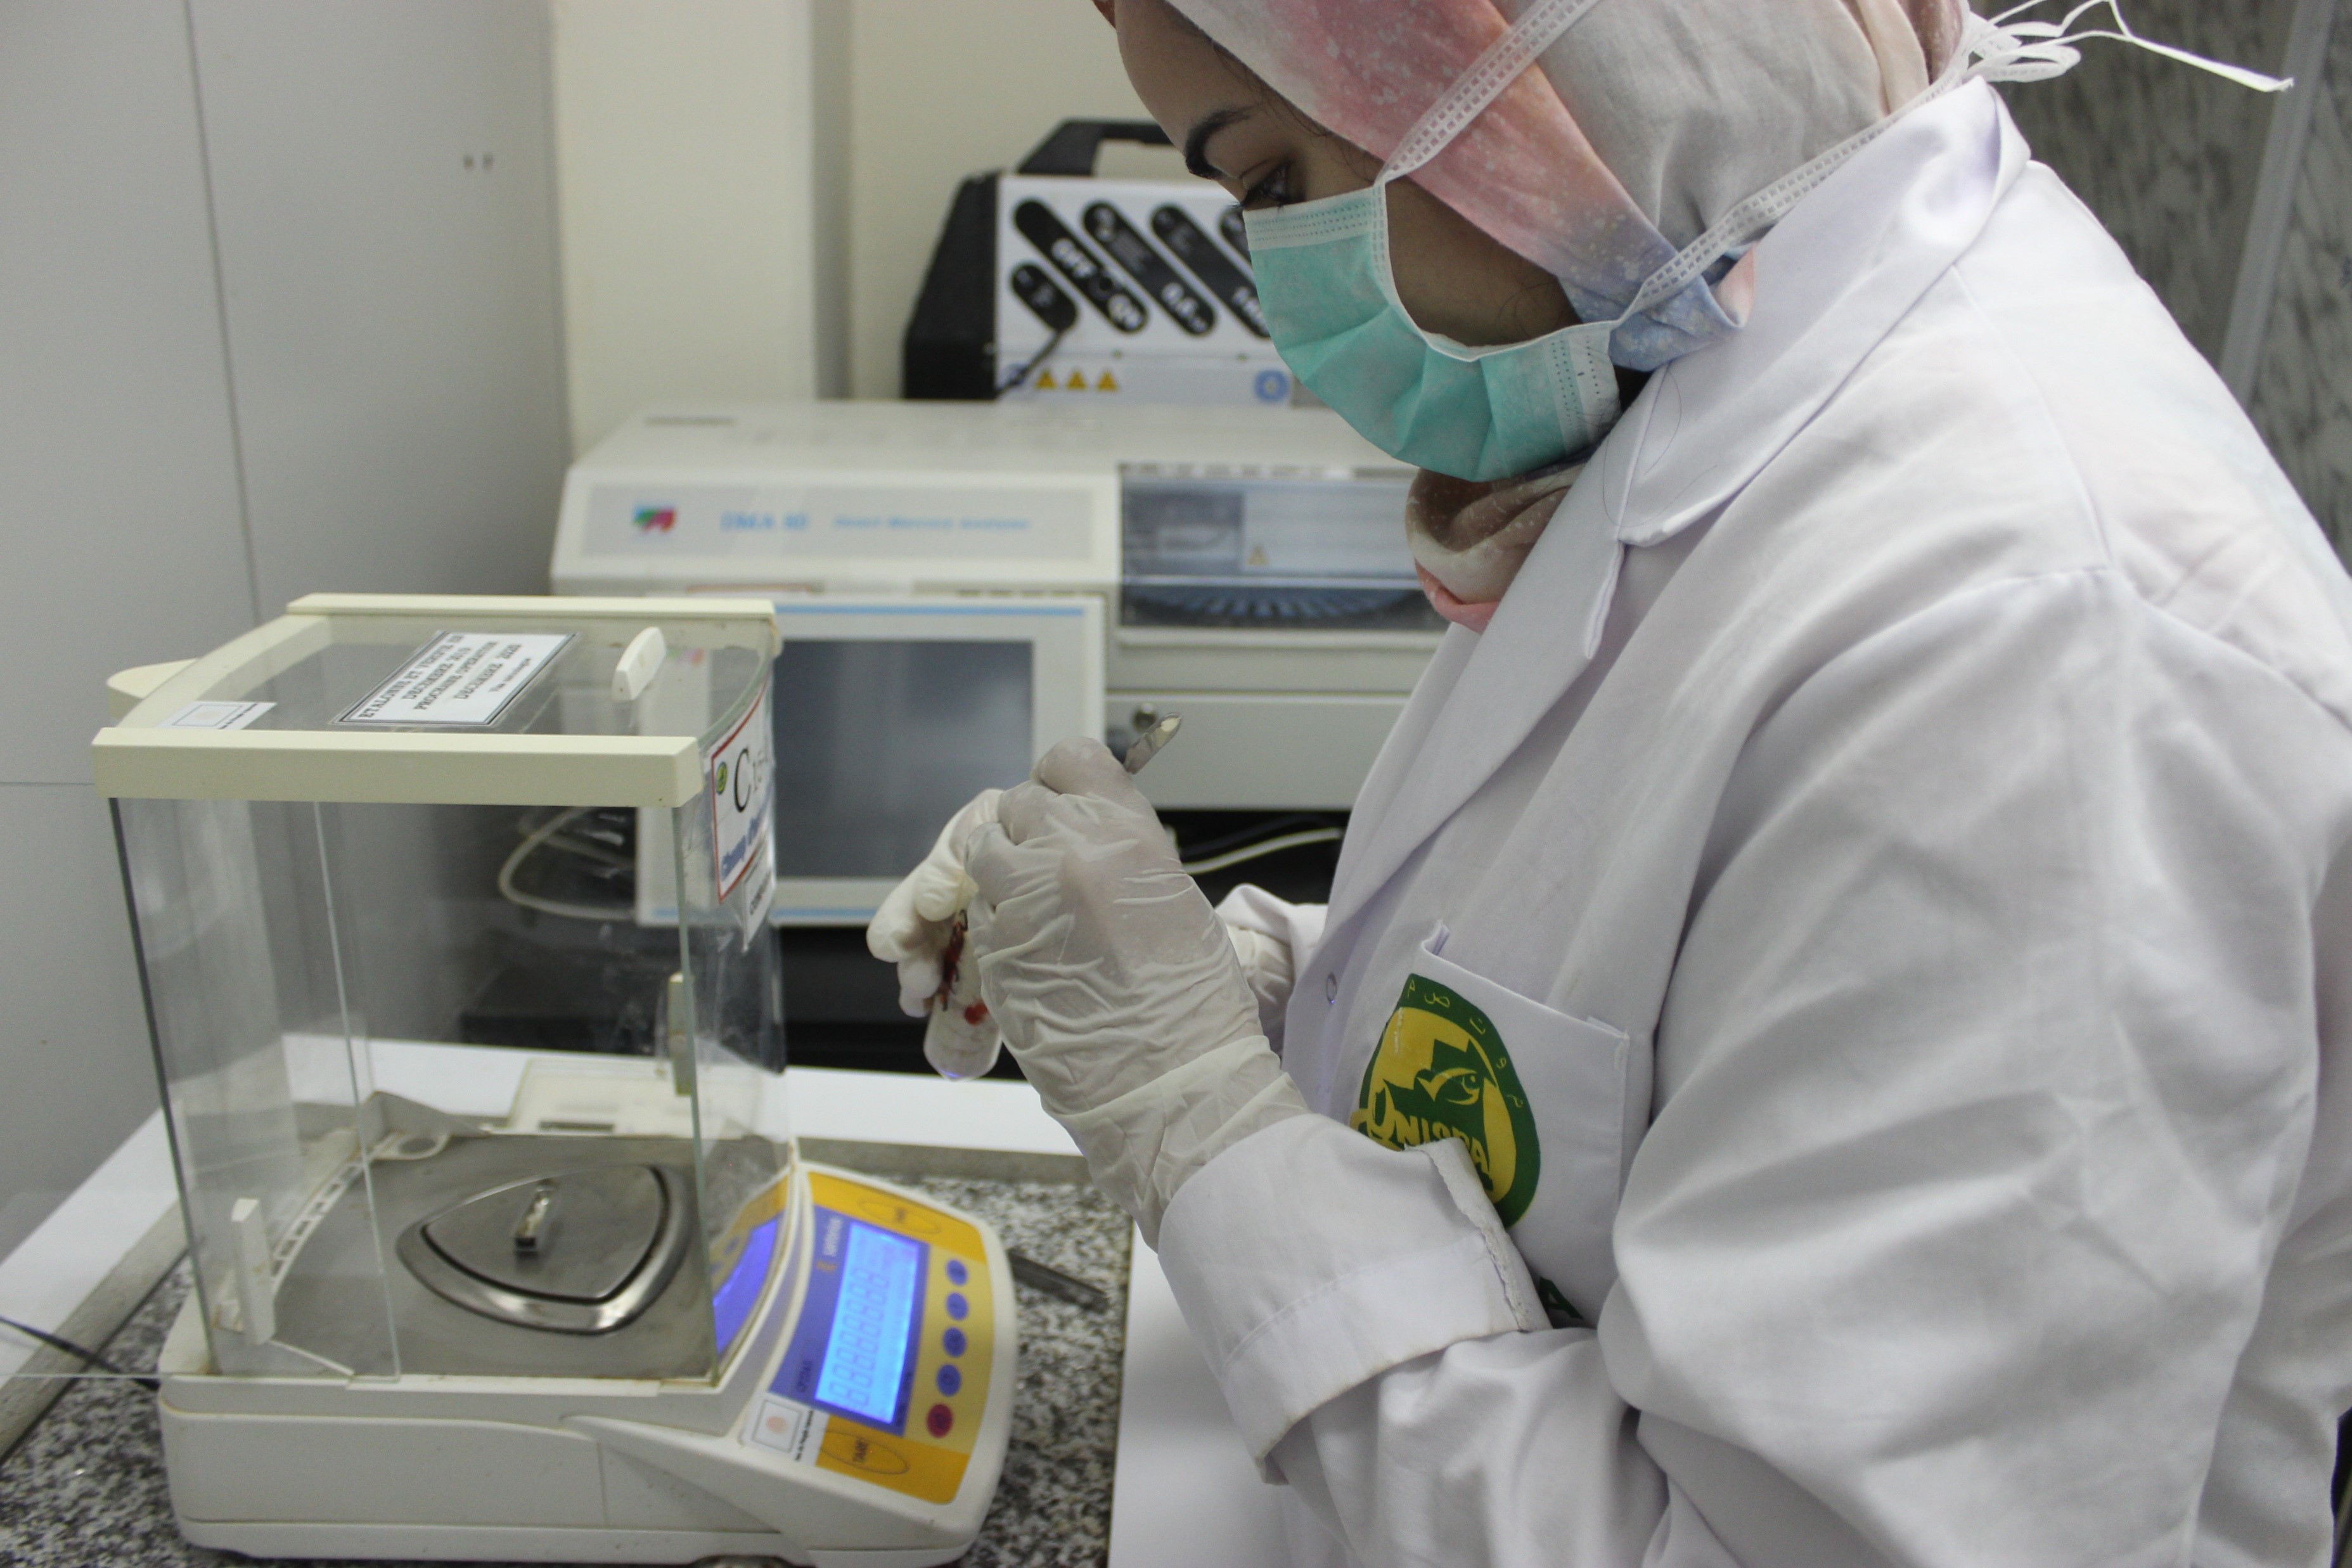 Employee of the Mauritanian bureau of sanitary inspections carrying out a quality analysis